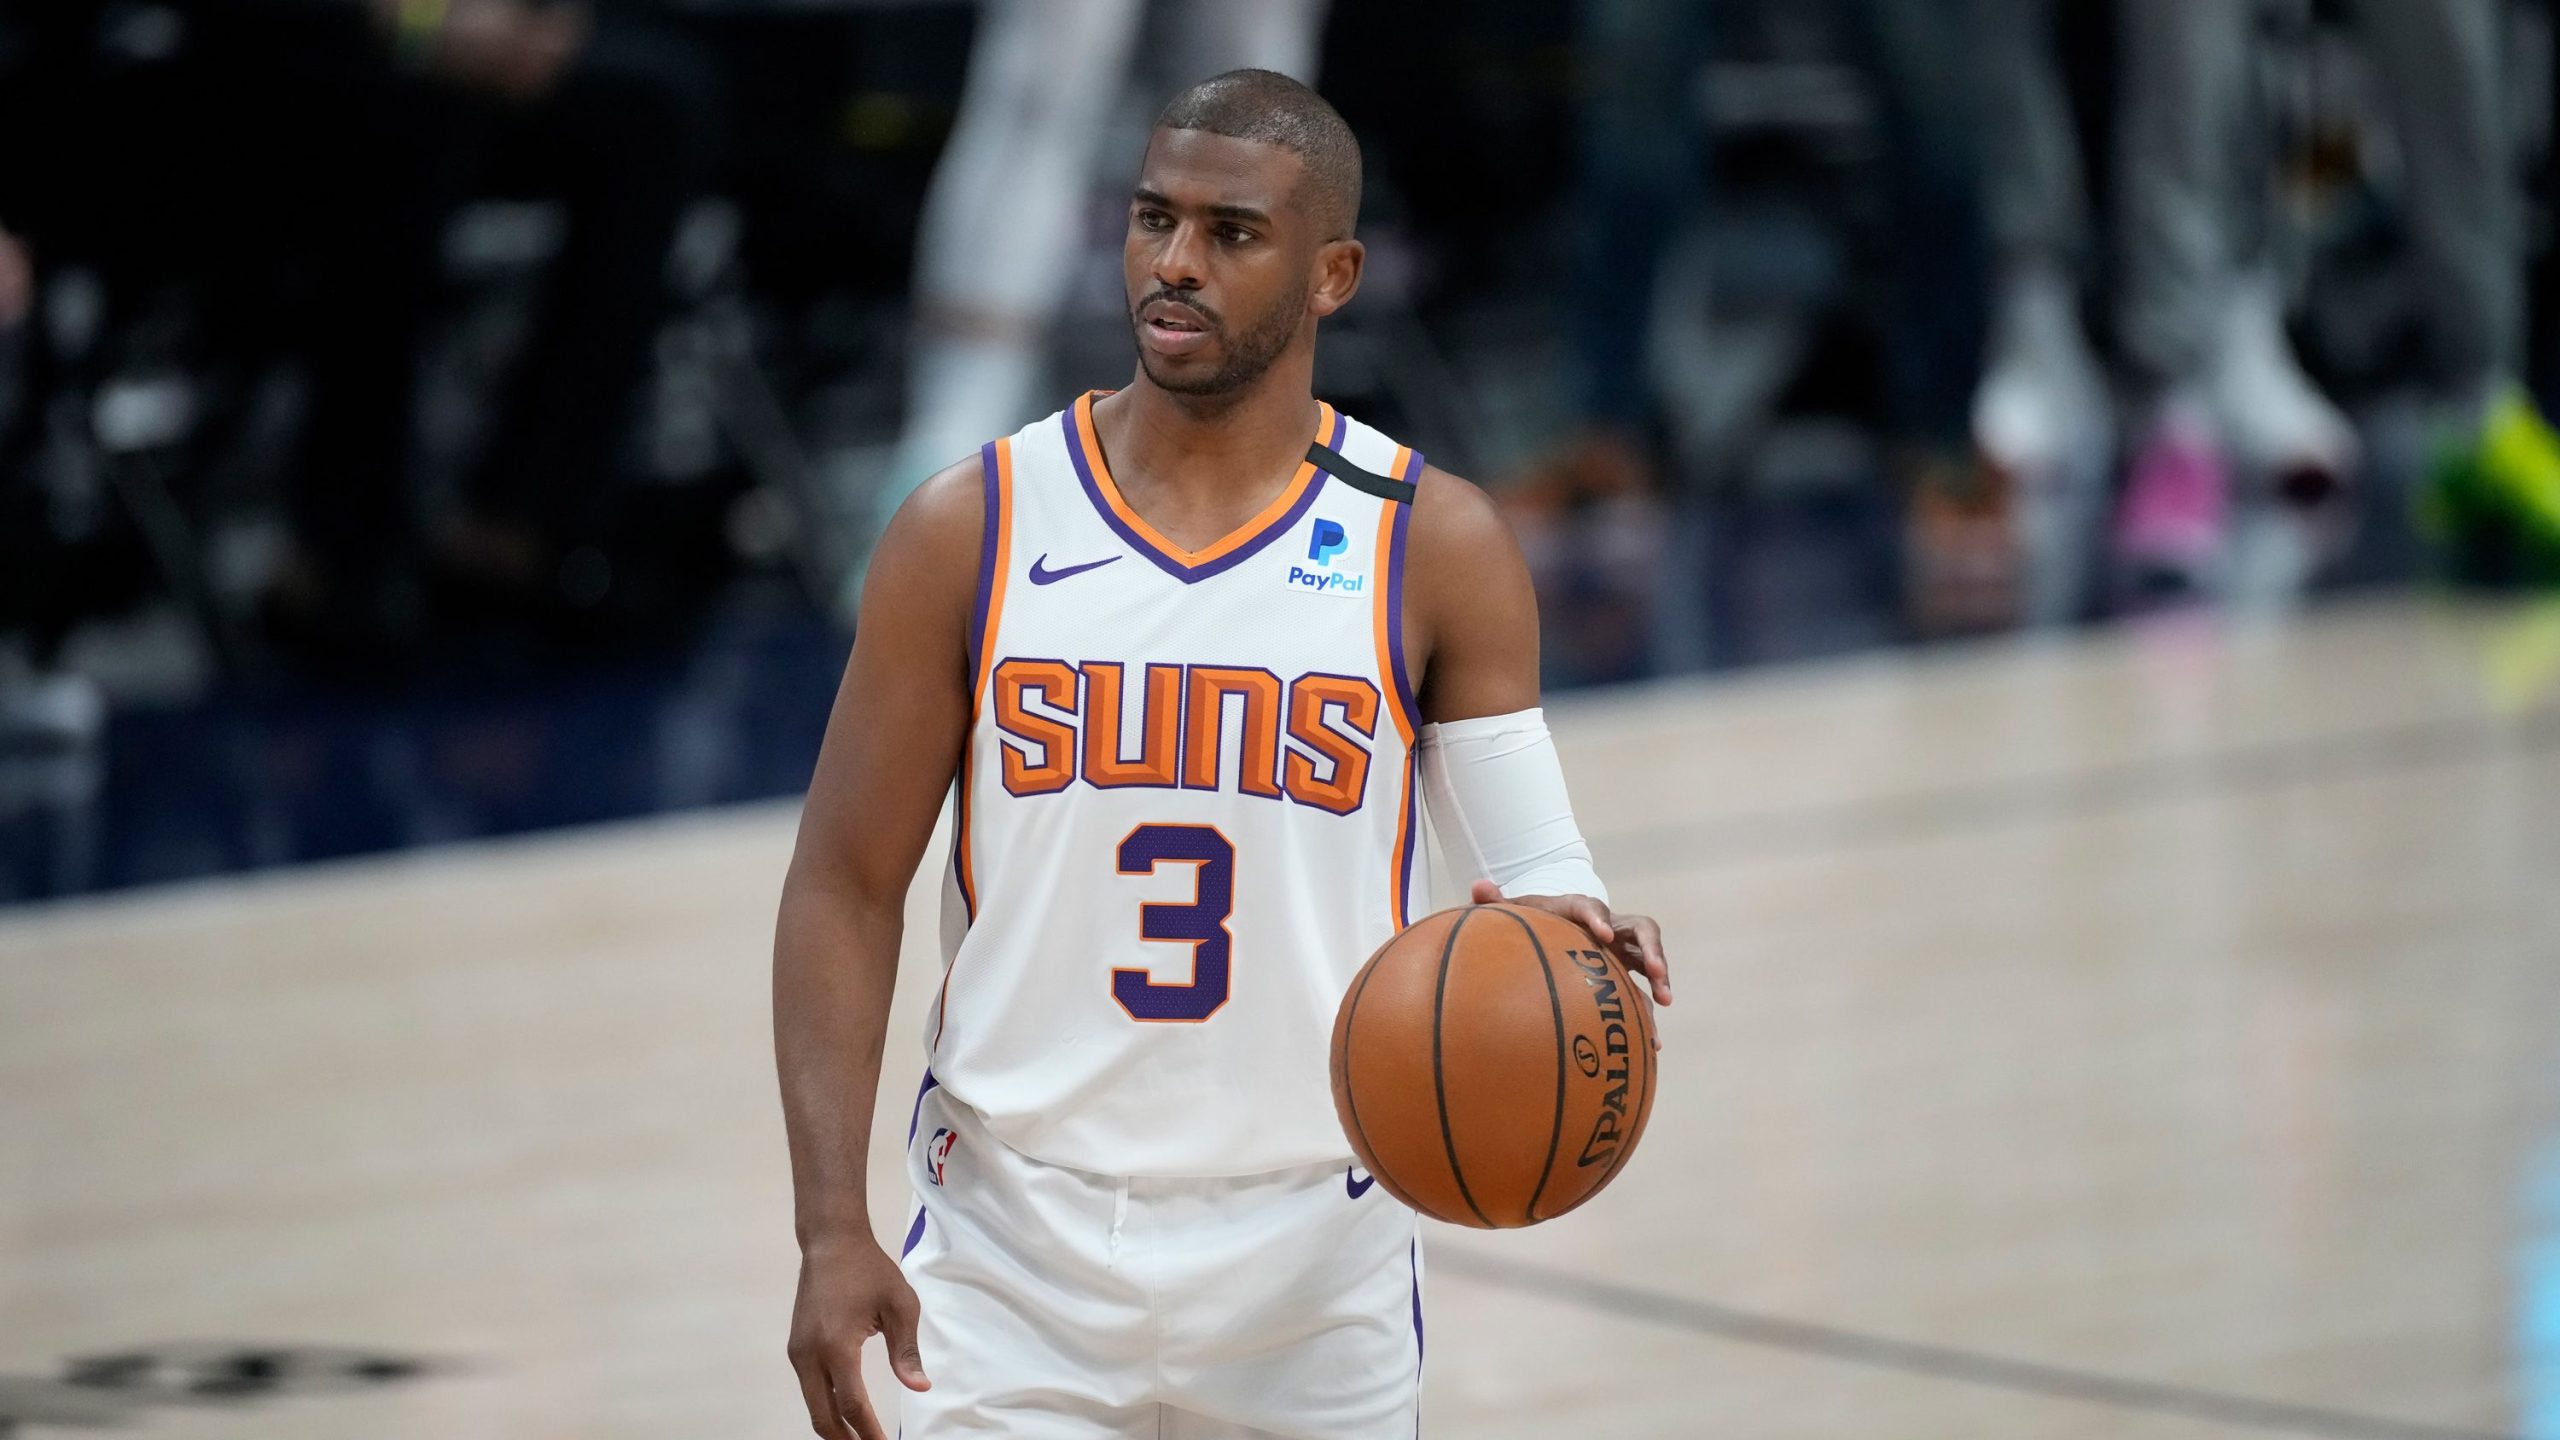 Chris Paul's Future: A Tug-of-War Between Lakers, Spurs, and Warriors